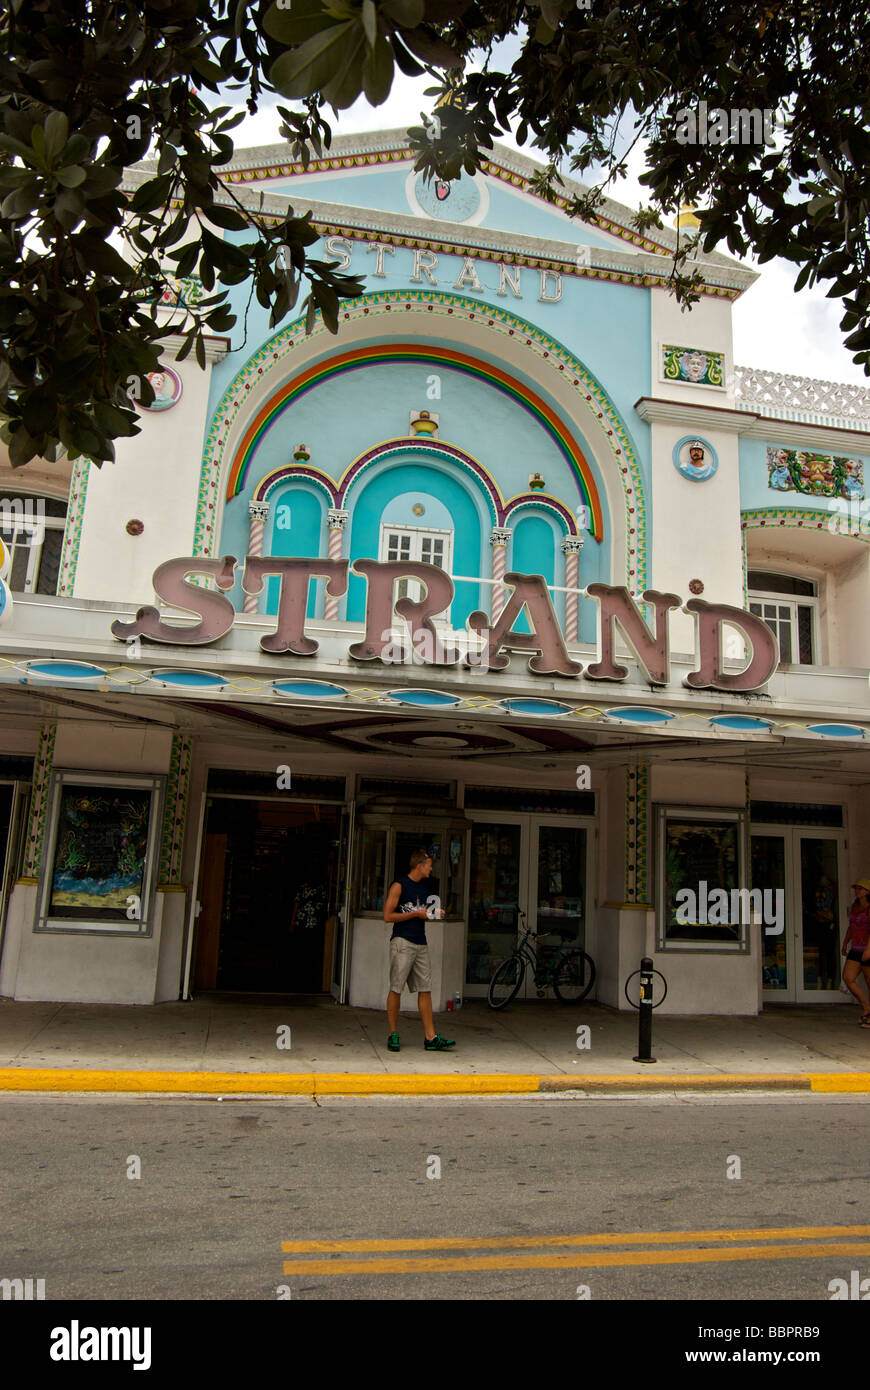 Tree famed Strand Theater now a Walgreens drug store 'Key West Florida' Stock Photo